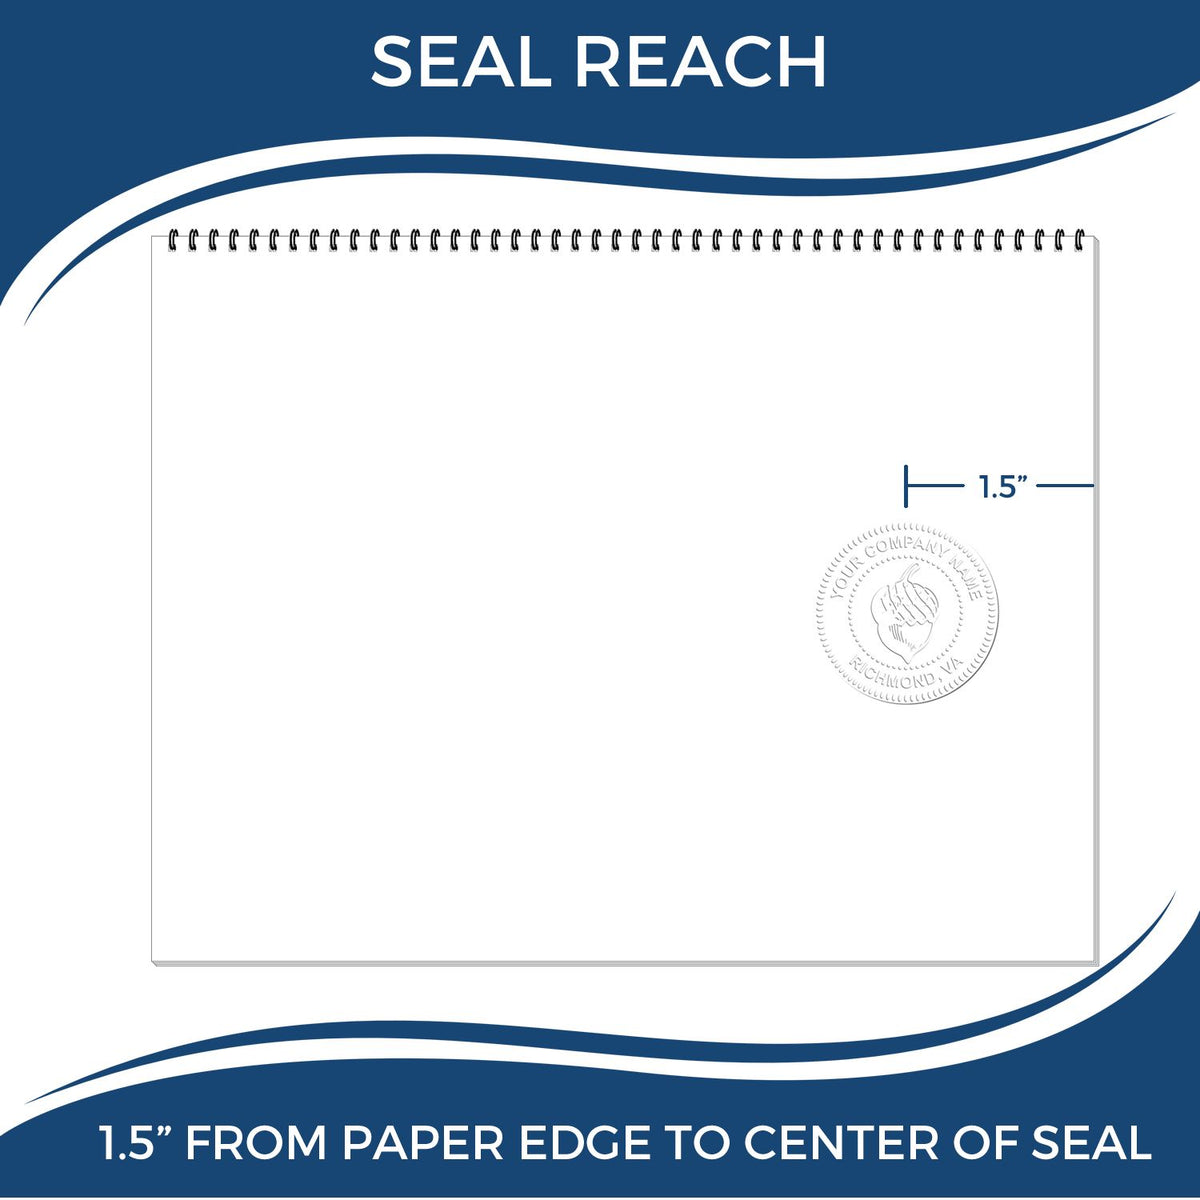 An infographic showing the seal reach which is represented by a ruler and a miniature seal image of the Gift Iowa Geologist Seal